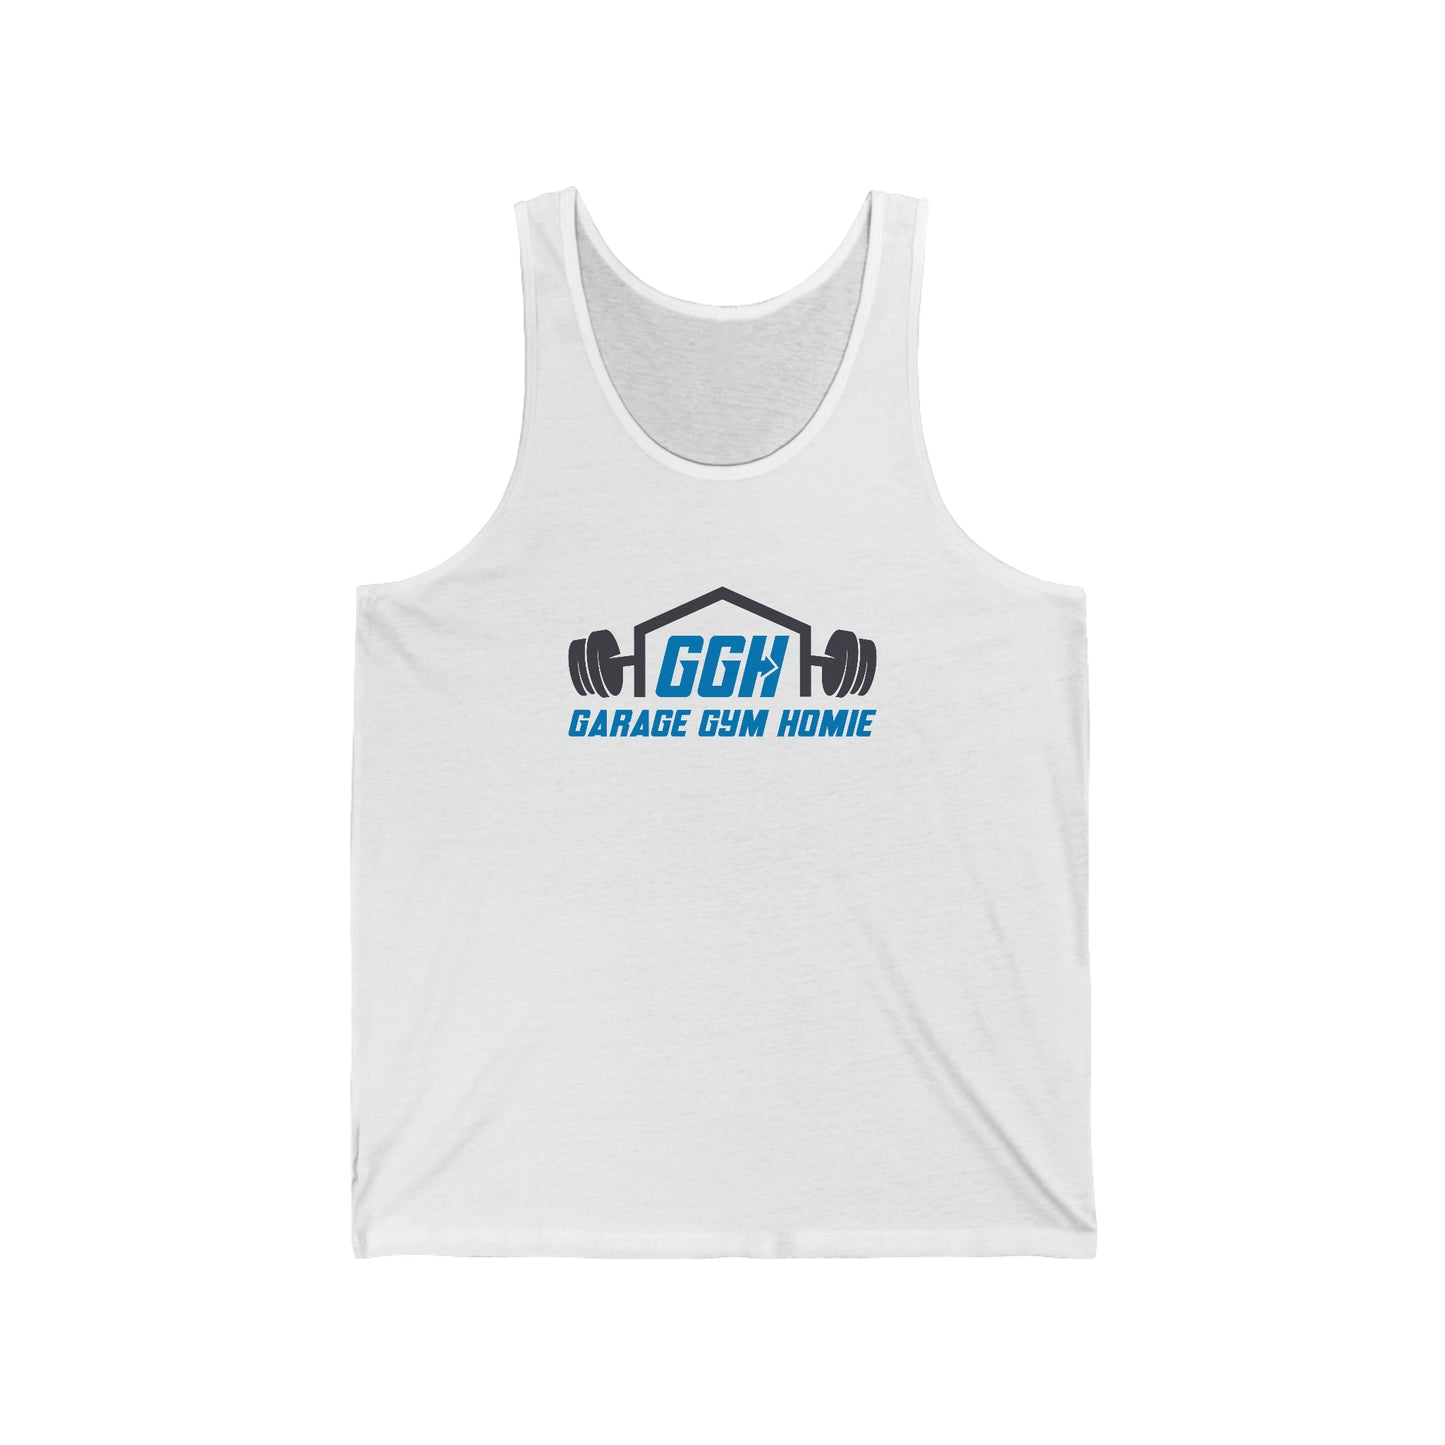 MY PRONOUNS ARE GYM/HOMIE - Jersey Tank